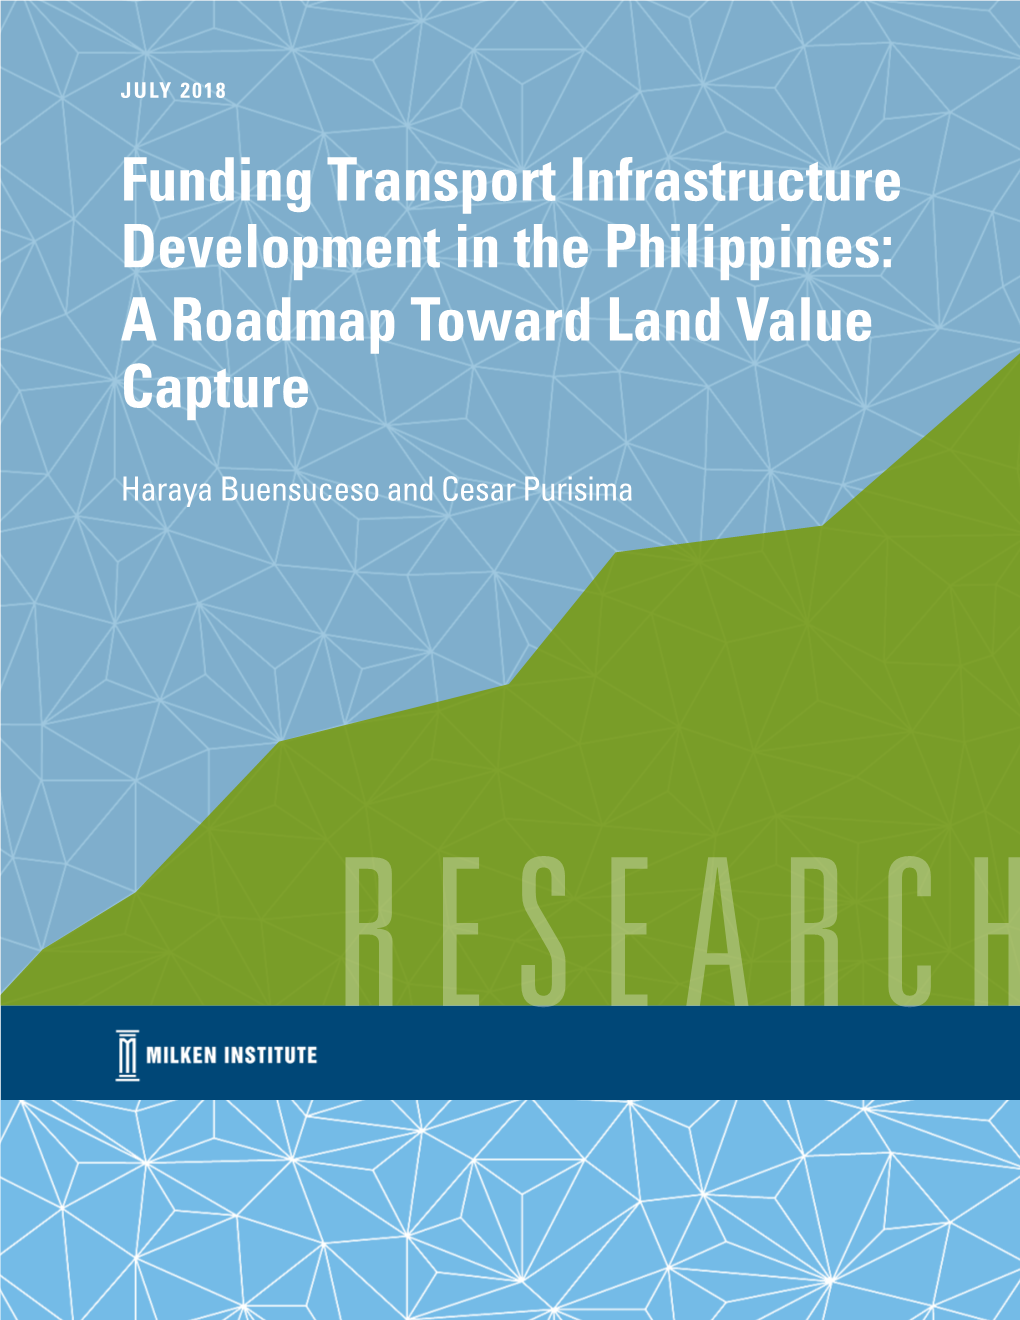 Funding Transport Infrastructure Development in the Philippines: a Roadmap Toward Land Value Capture